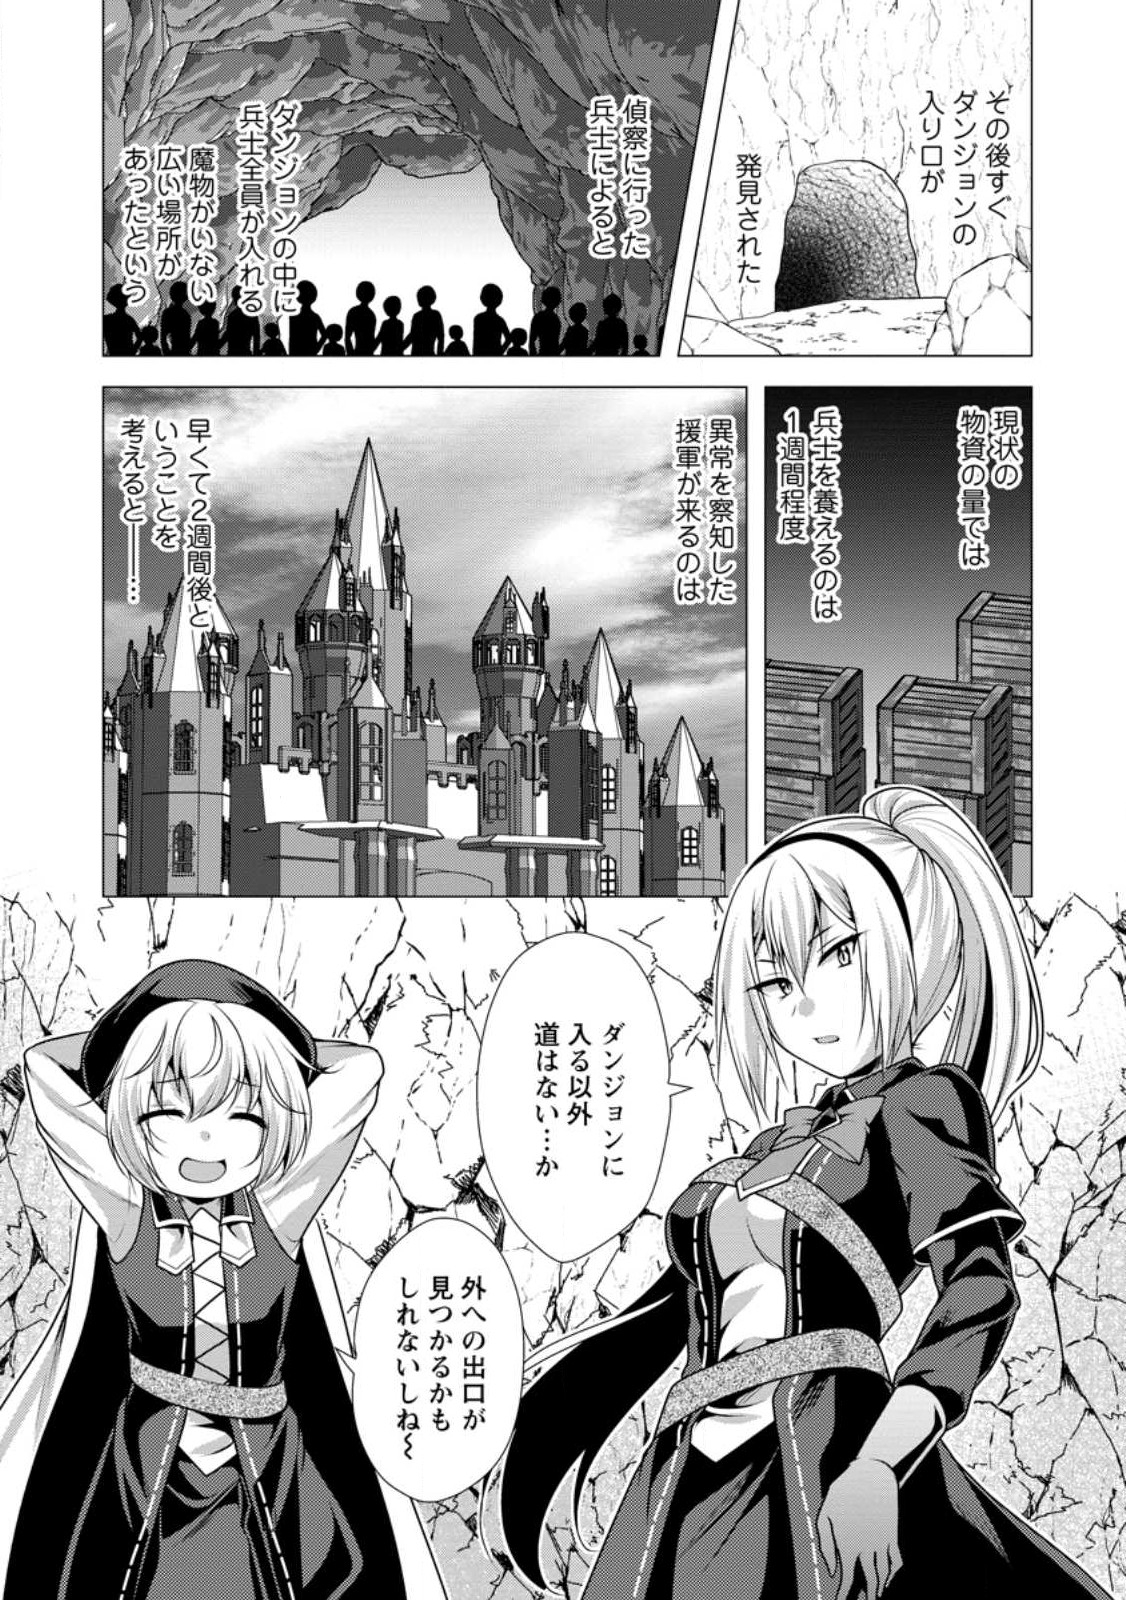 Hisshou Dungeon Unei Houhou - Chapter 58.2 - Page 1